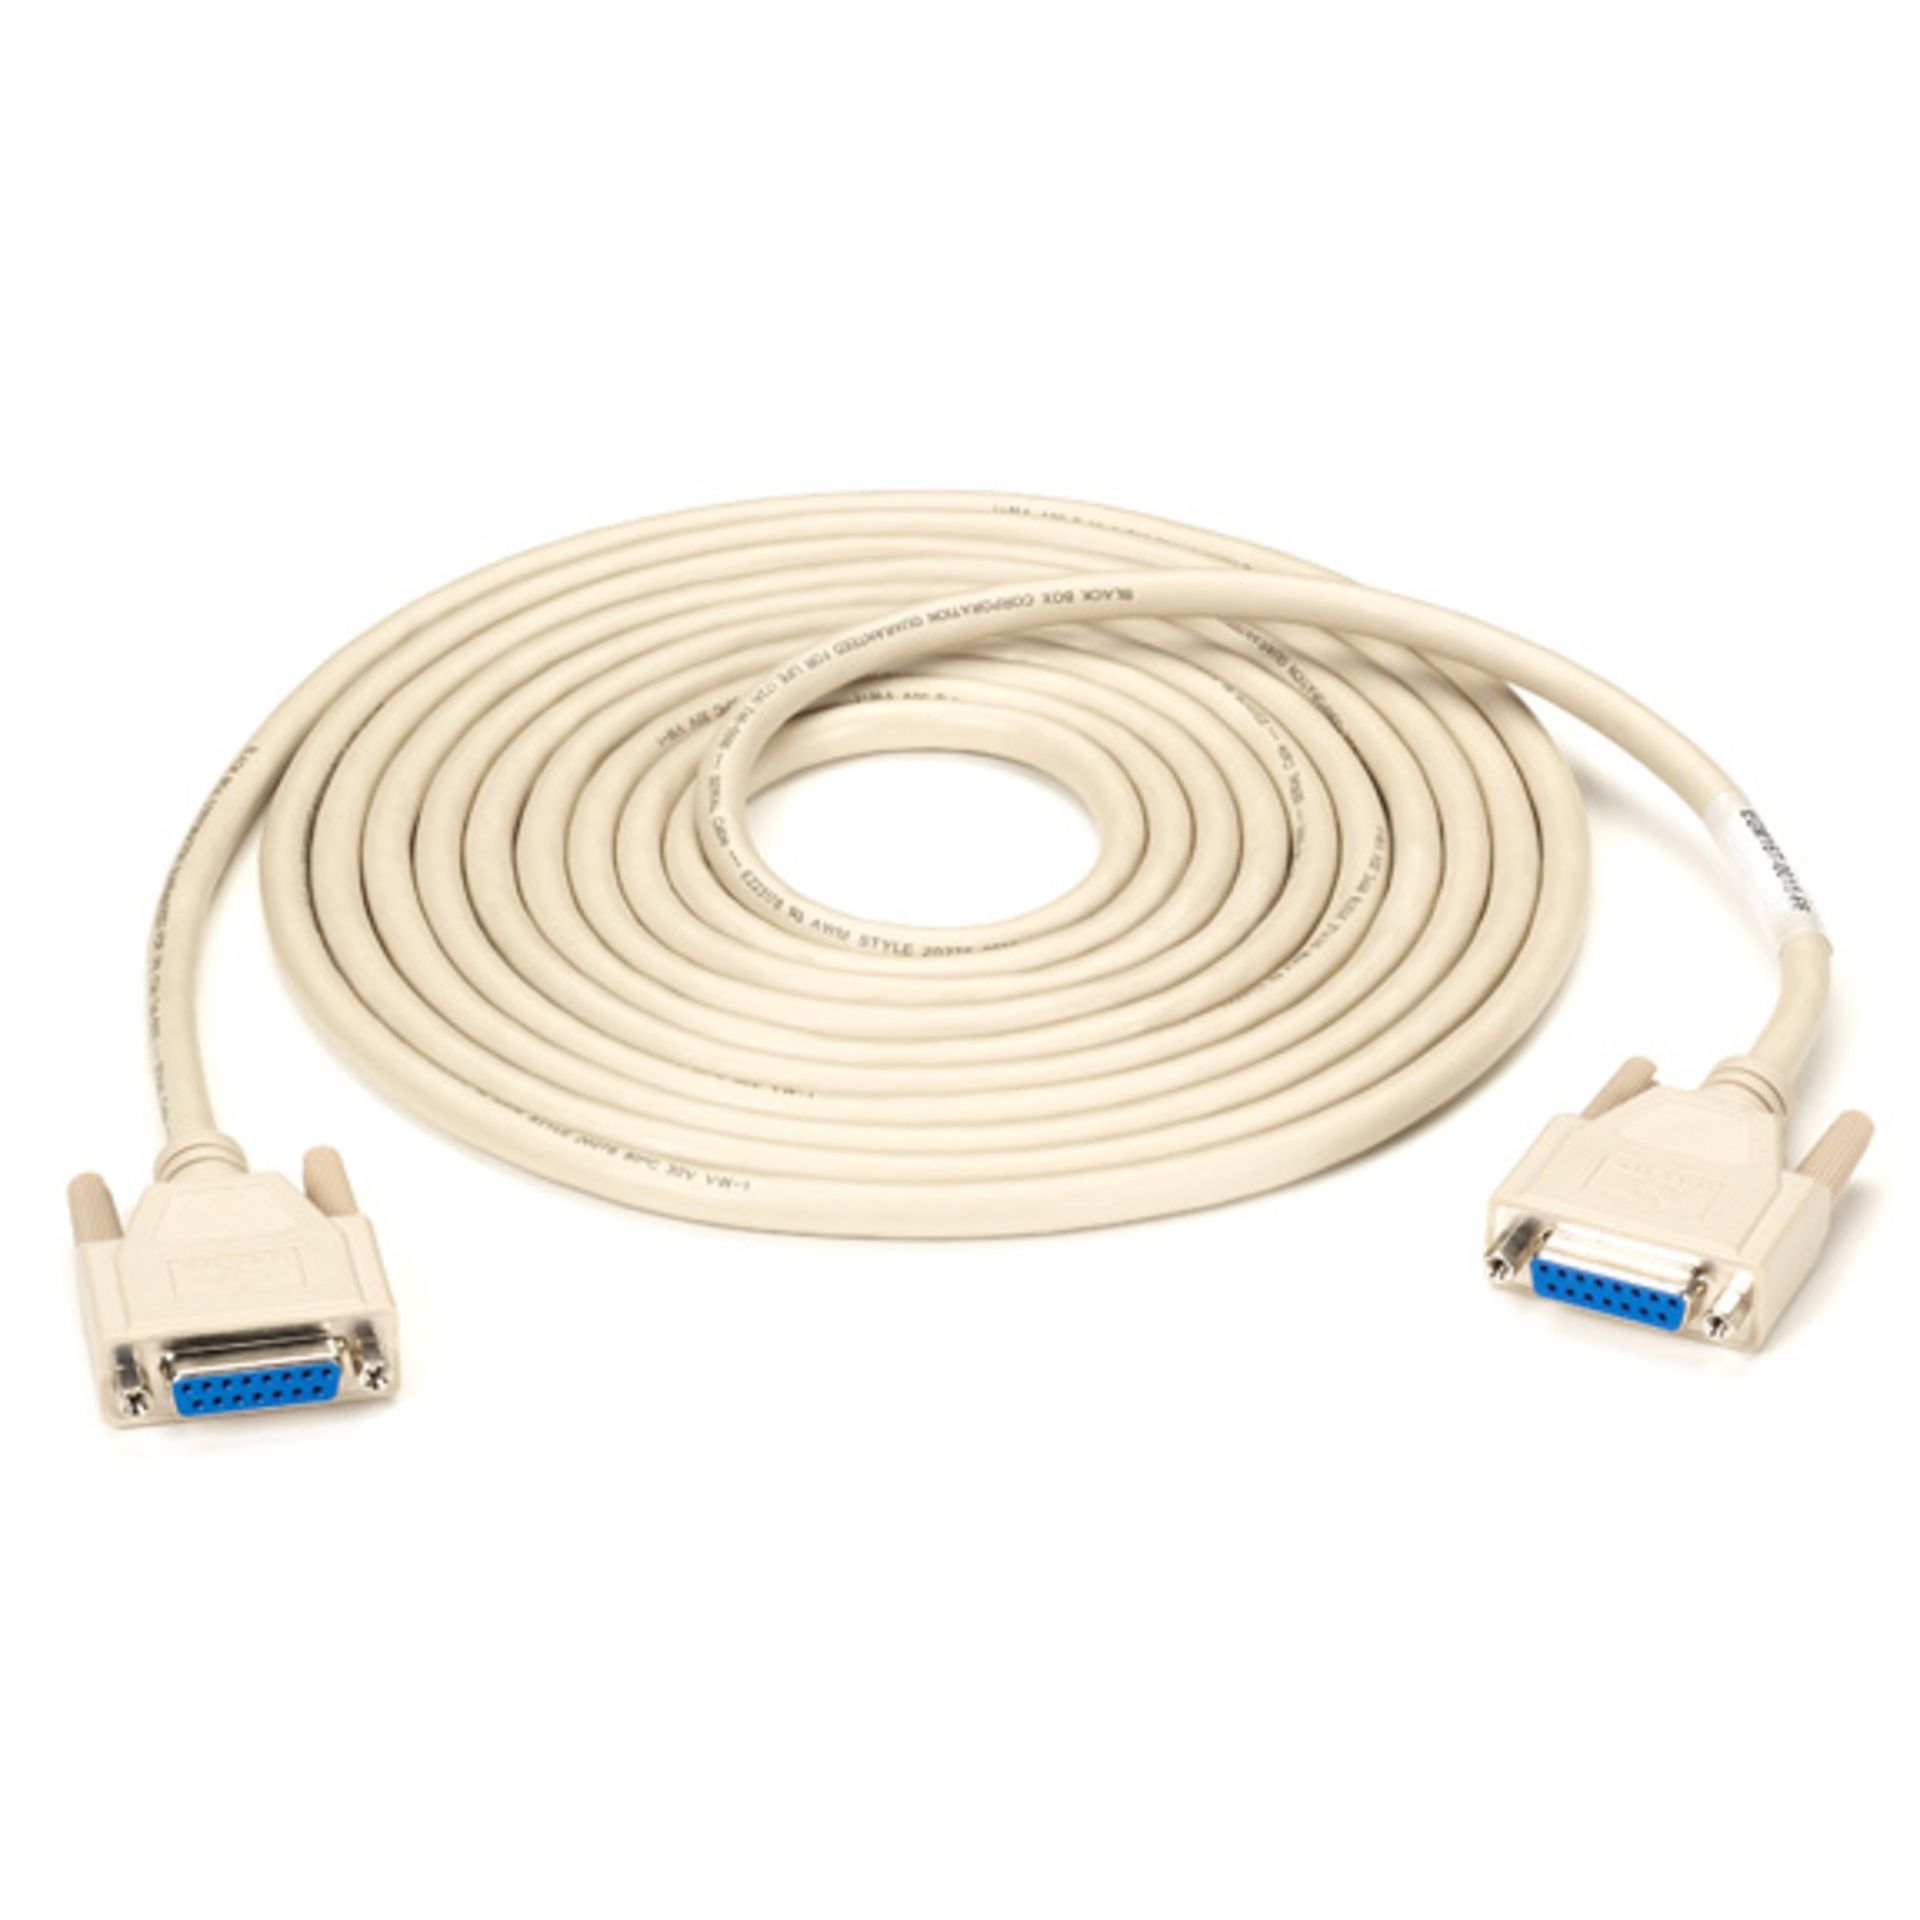 Serial Cables, Coax Cables, Secure Switch Cable - Image 2 of 5